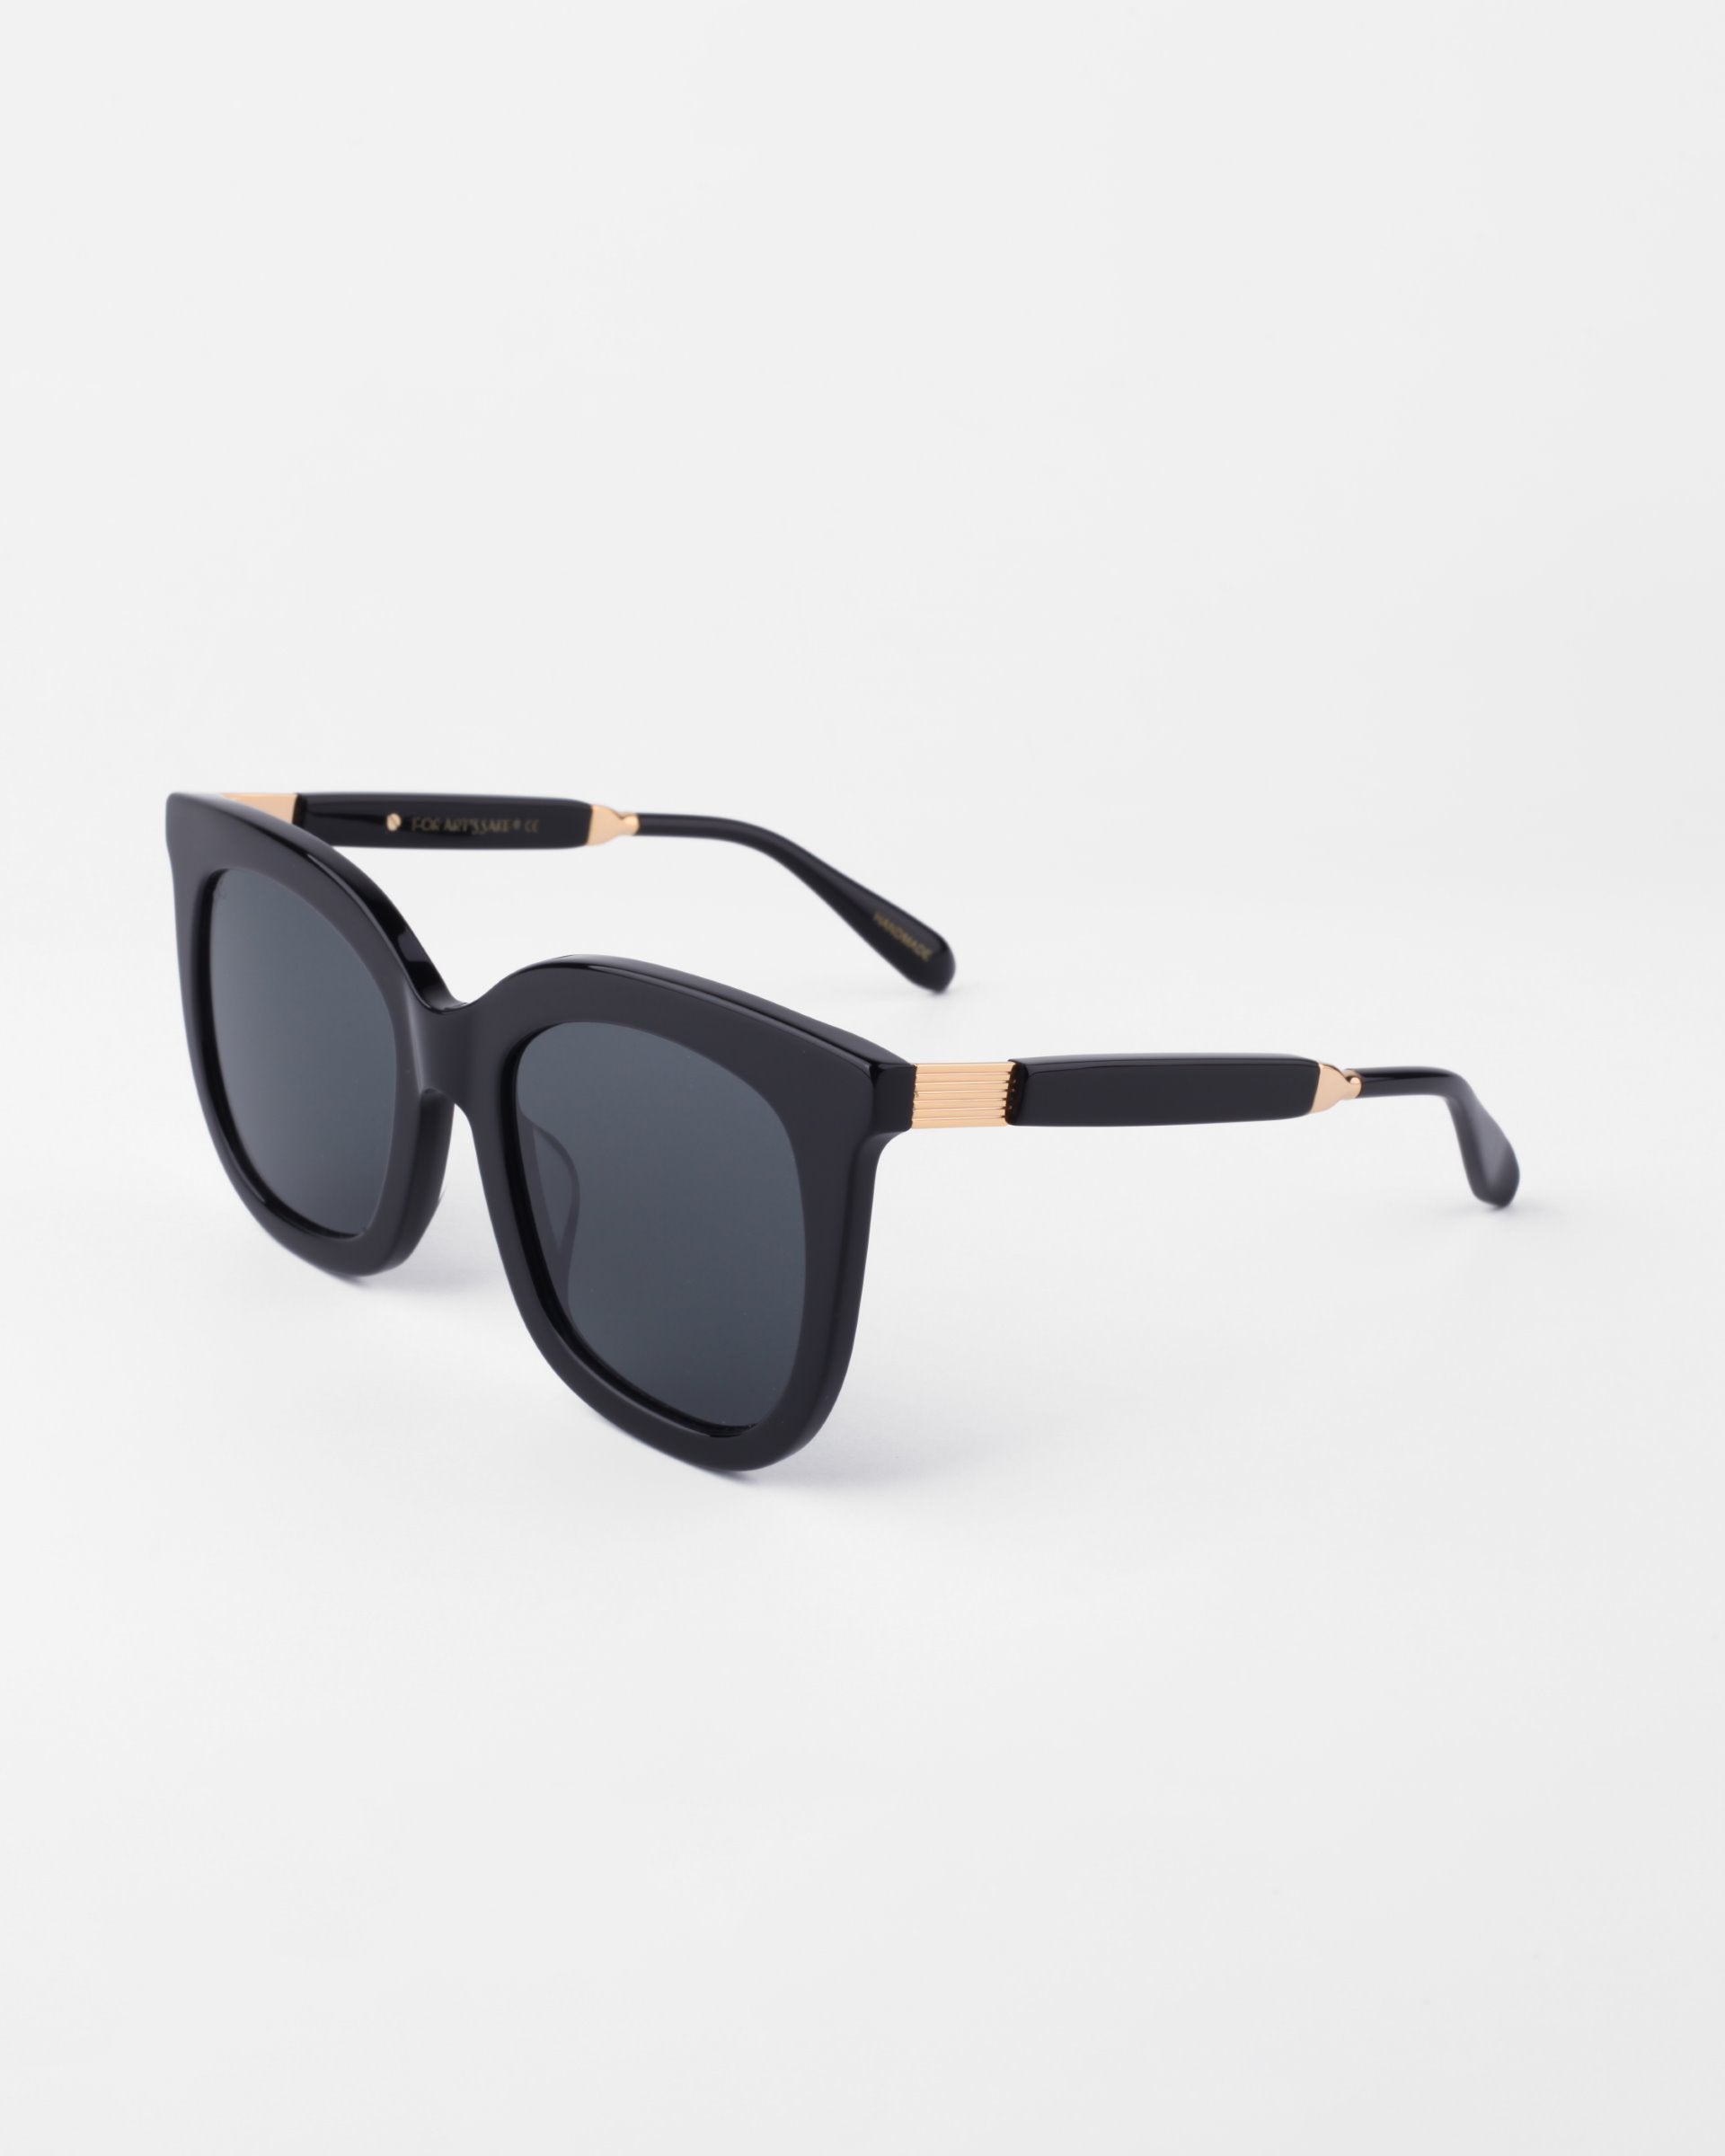 A pair of Riverside by For Art&#39;s Sake® black square-framed sunglasses with shatter-resistant lenses and gold-plated detailing on the temples and arms, displayed on a plain white background.